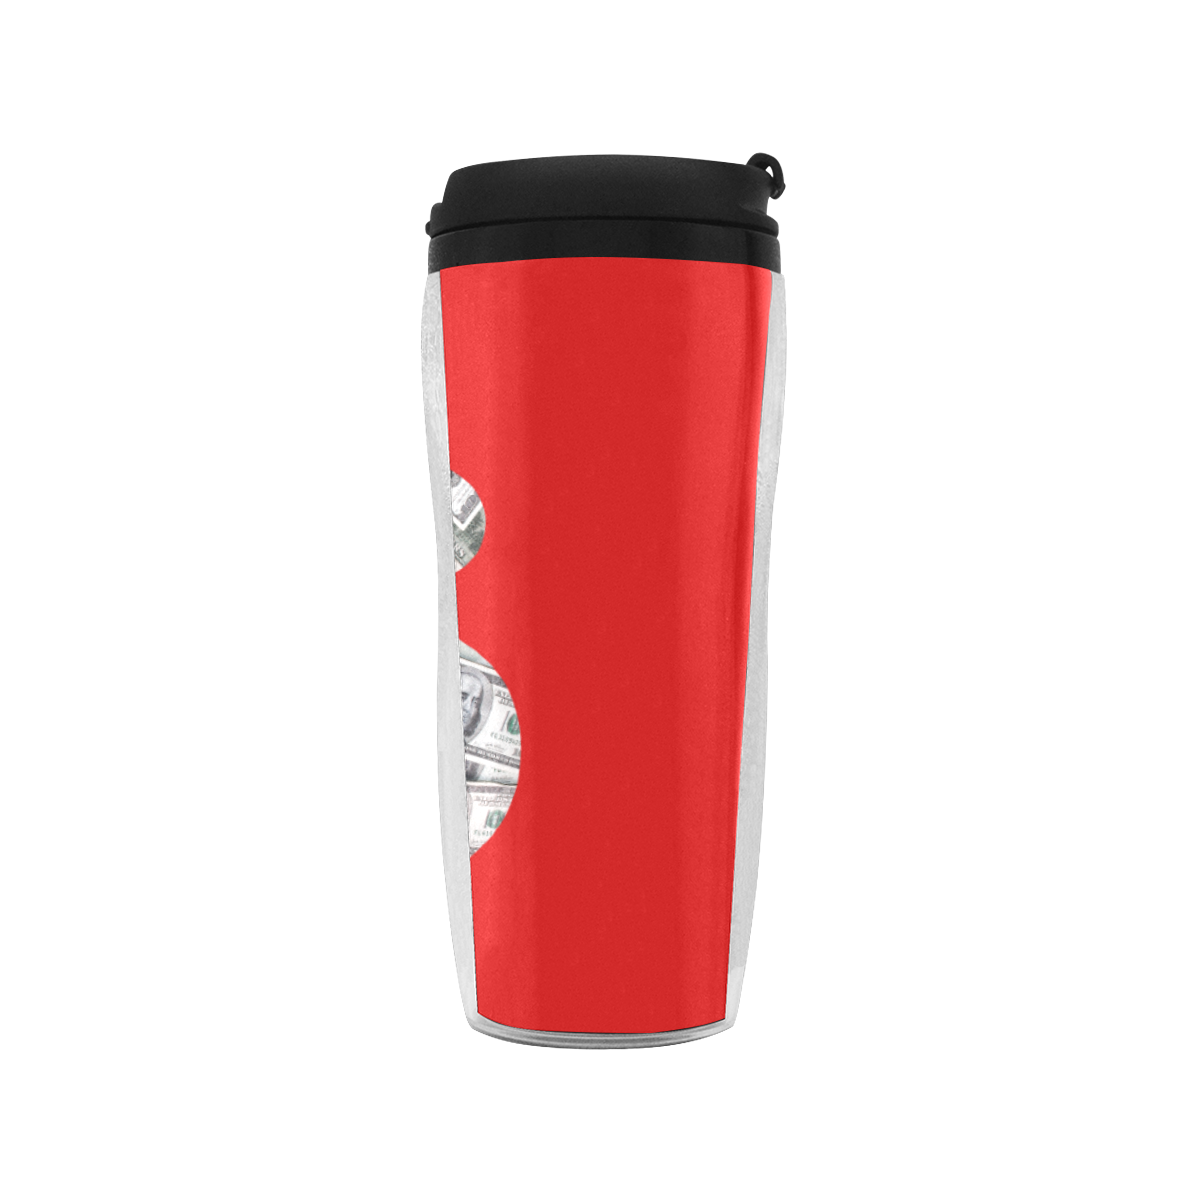 Hundred Dollar Bills - Money Sign on Red Reusable Coffee Cup (11.8oz)